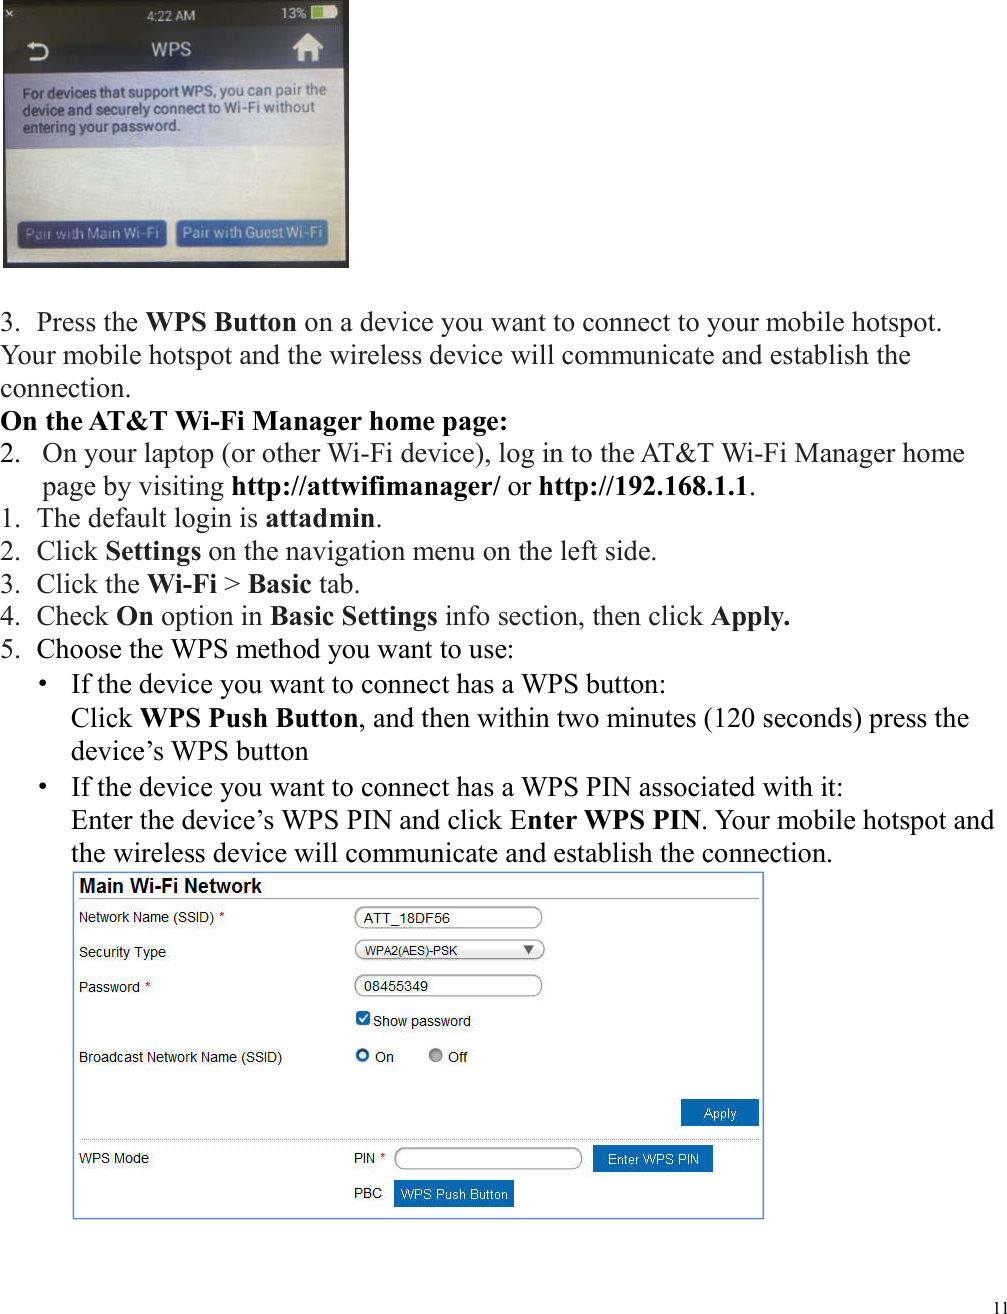 11   3. Press the WPS Button on a device you want to connect to your mobile hotspot. Your mobile hotspot and the wireless device will communicate and establish the connection. On the AT&amp;T Wi-Fi Manager home page: 2. On your laptop (or other Wi-Fi device), log in to the AT&amp;T Wi-Fi Manager home page by visiting http://attwifimanager/ or http://192.168.1.1. 1. The default login is attadmin. 2. Click Settings on the navigation menu on the left side. 3. Click the Wi-Fi &gt; Basic tab. 4. Check On option in Basic Settings info section, then click Apply. 5. Choose the WPS method you want to use:   ·  If the device you want to connect has a WPS button:   Click WPS Push Button, and then within two minutes (120 seconds) press the device’s WPS button   ·  If the device you want to connect has a WPS PIN associated with it:   Enter the device’s WPS PIN and click Enter WPS PIN. Your mobile hotspot and the wireless device will communicate and establish the connection.     